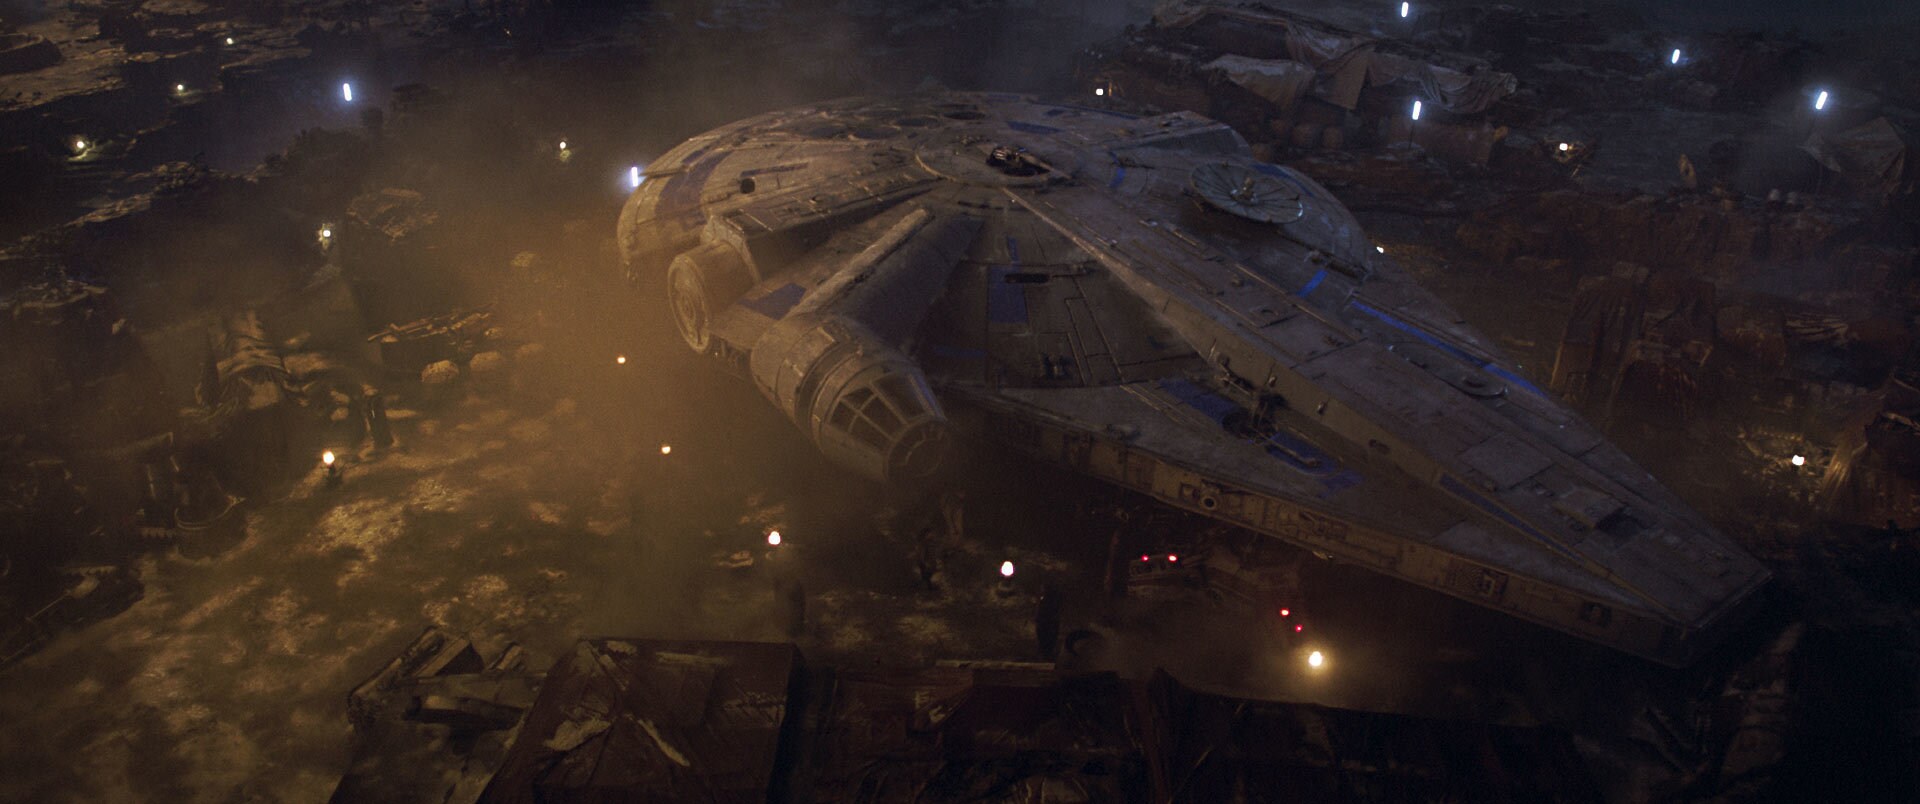 Outside, at one of the lodge’s landing pads, sits the Millennium Falcon, a Corellian YT-1300 frei...